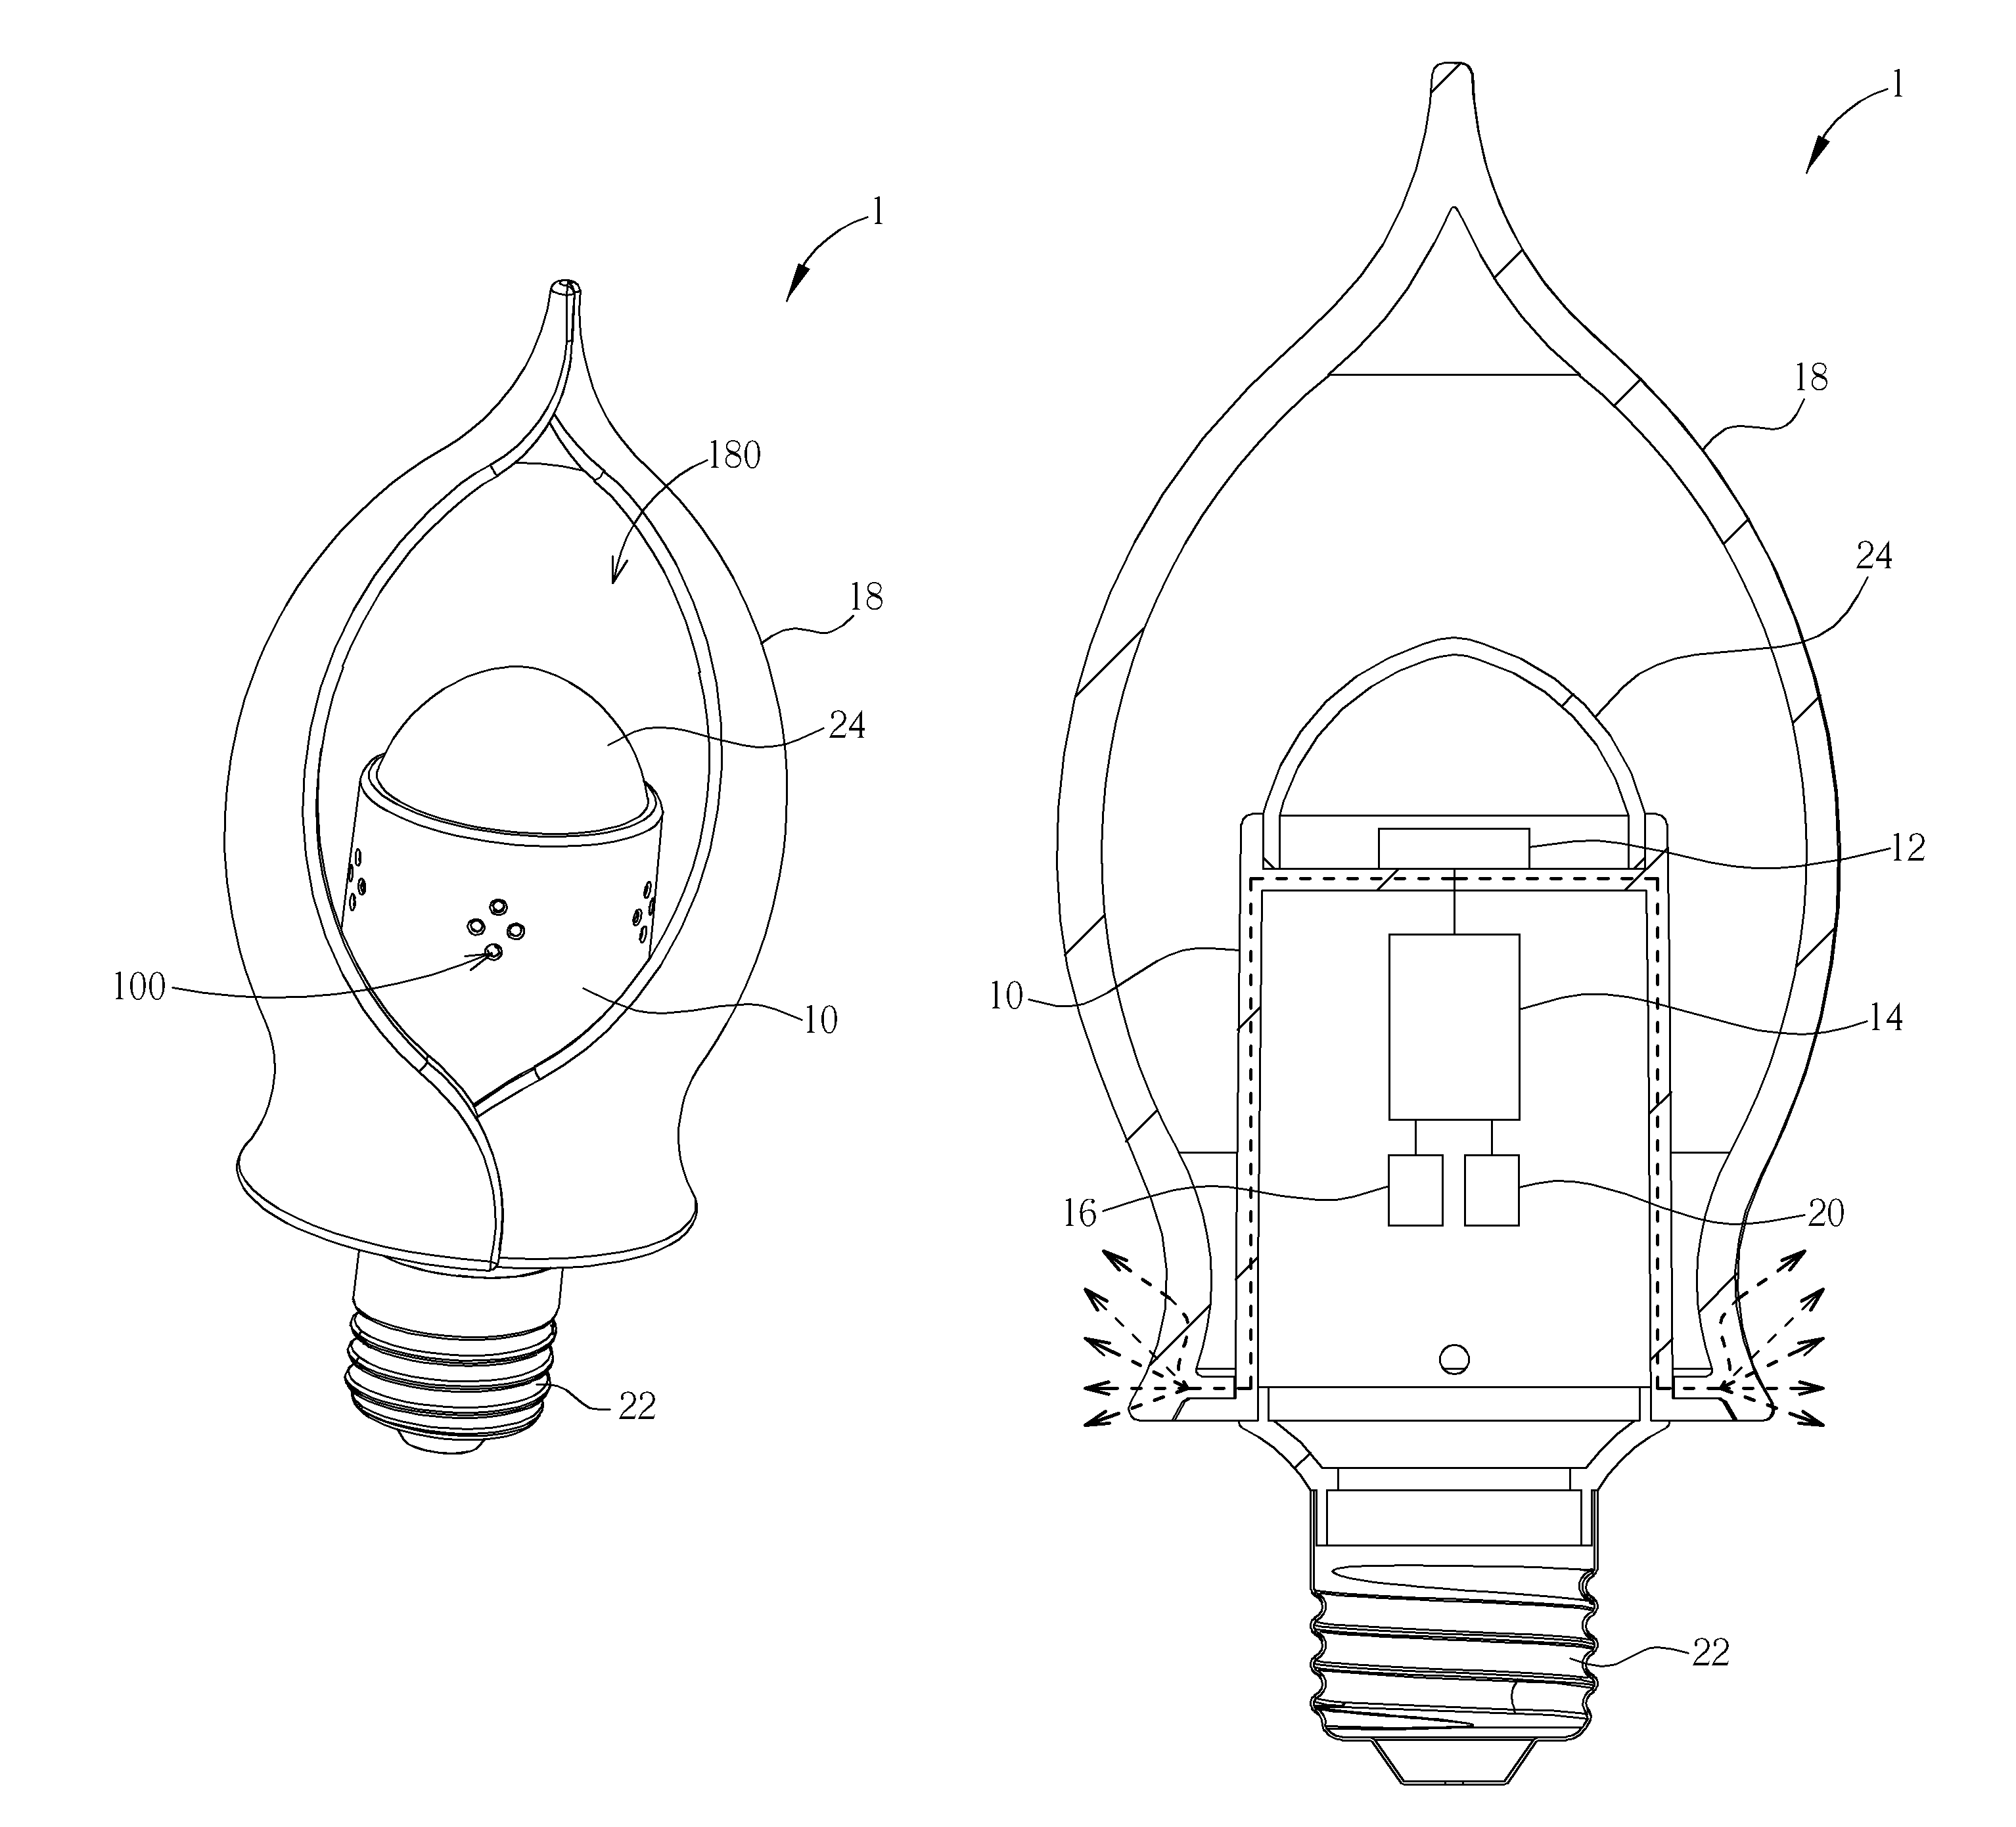 Illumination device capable of being controlled by blow